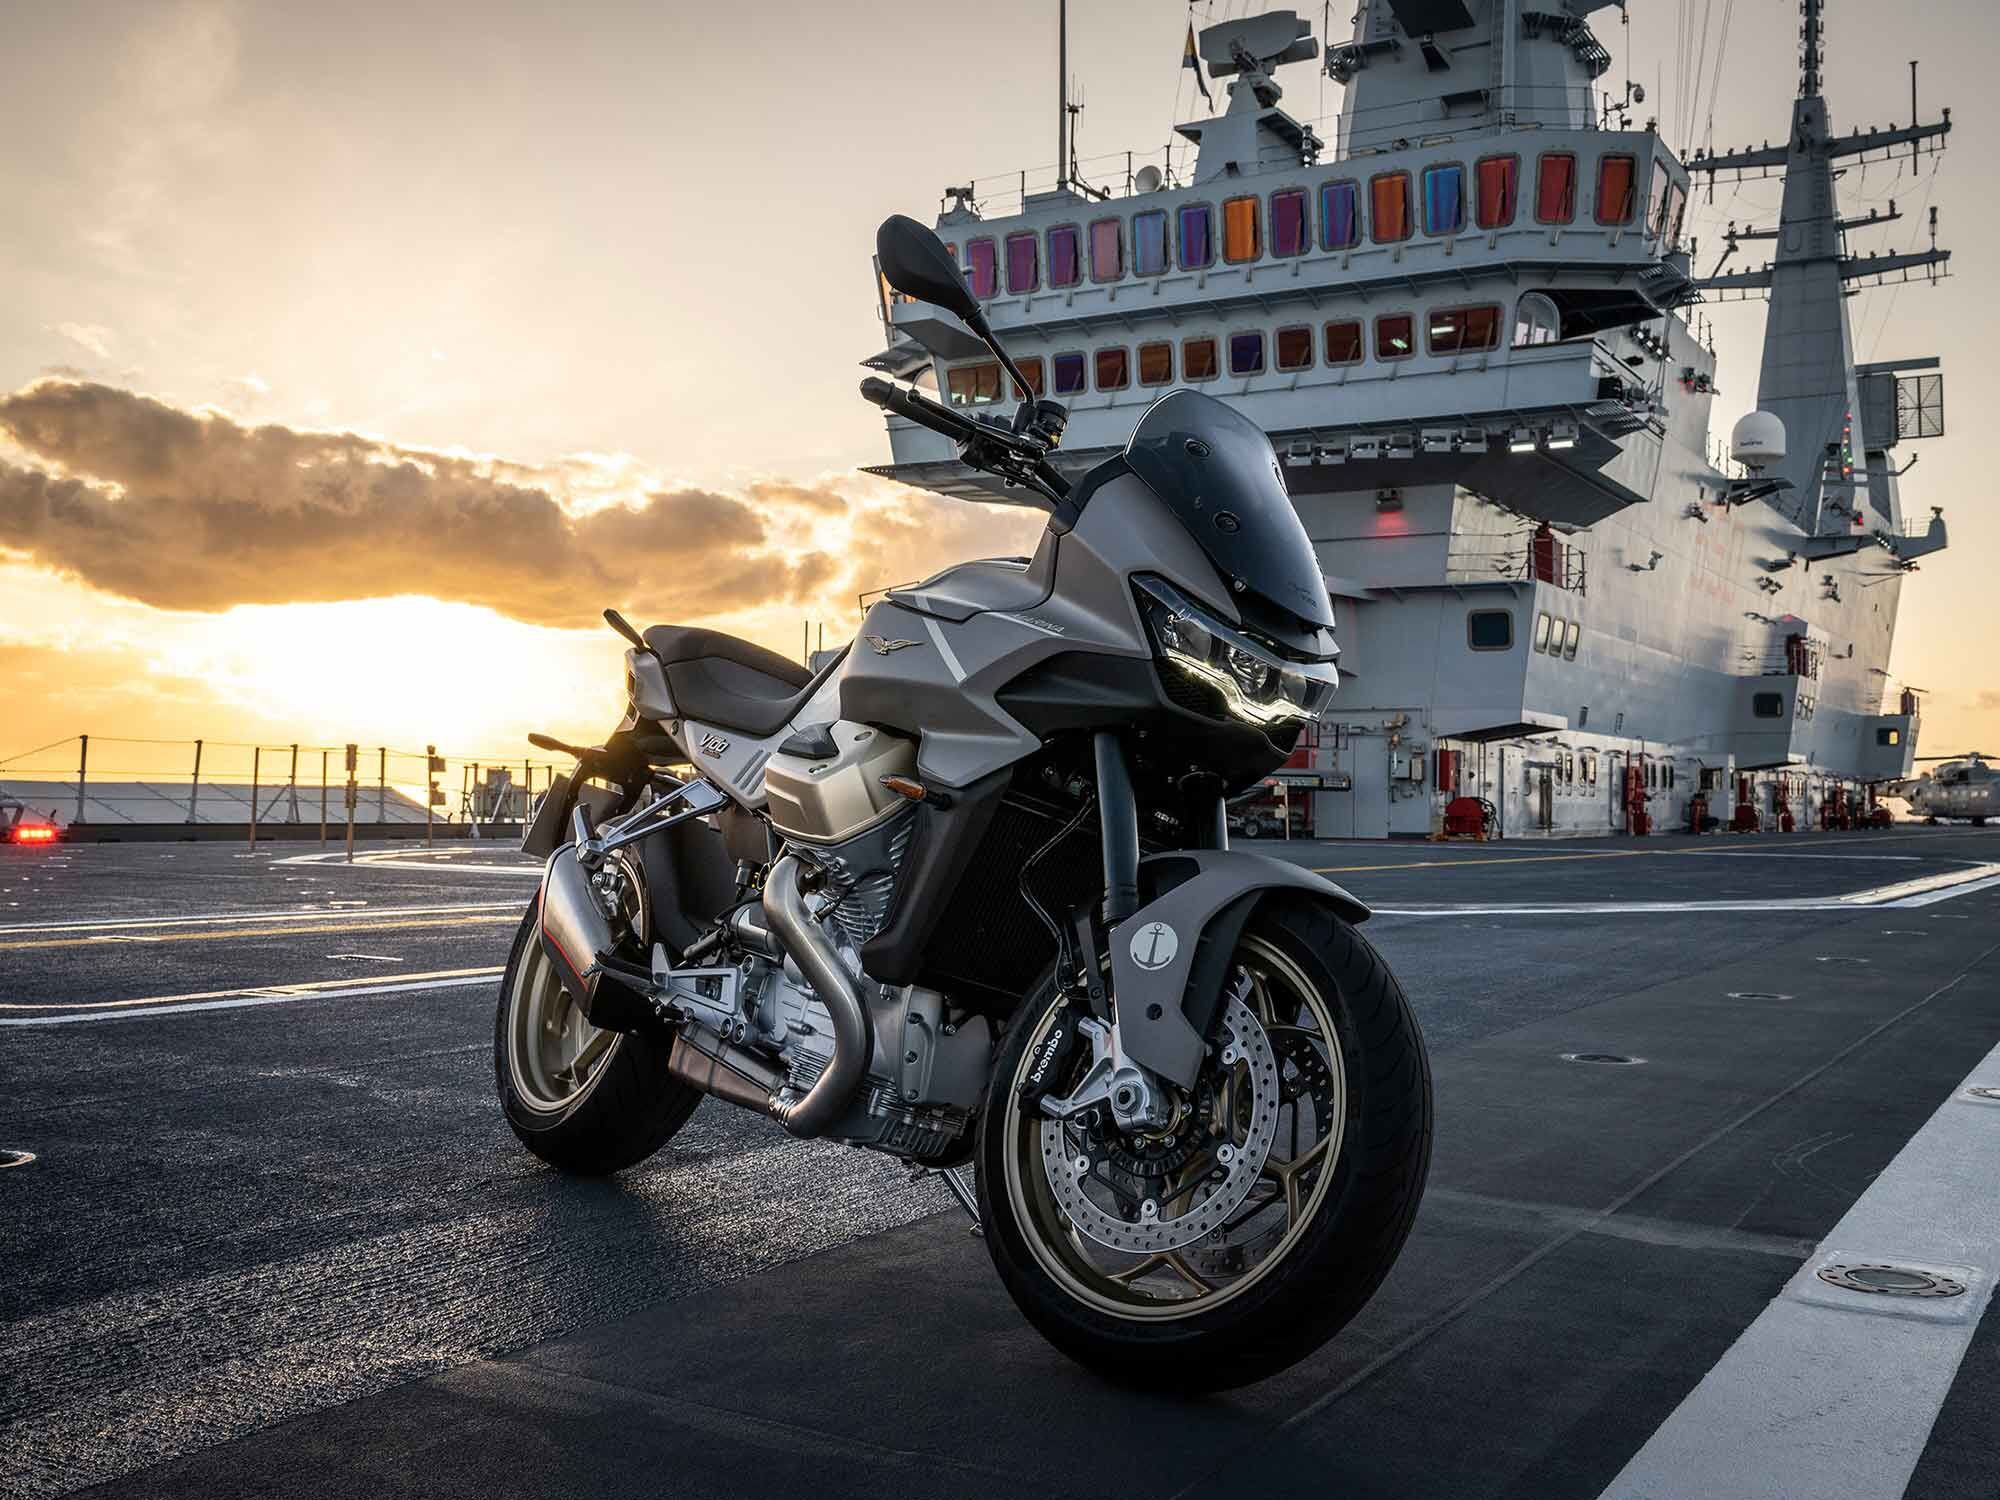 A fitting stage for Moto Guzzi’s latest special edition: The V100 Mandello Aviazione Navale sits on the flight deck of Italian aircraft carrier Cavour.